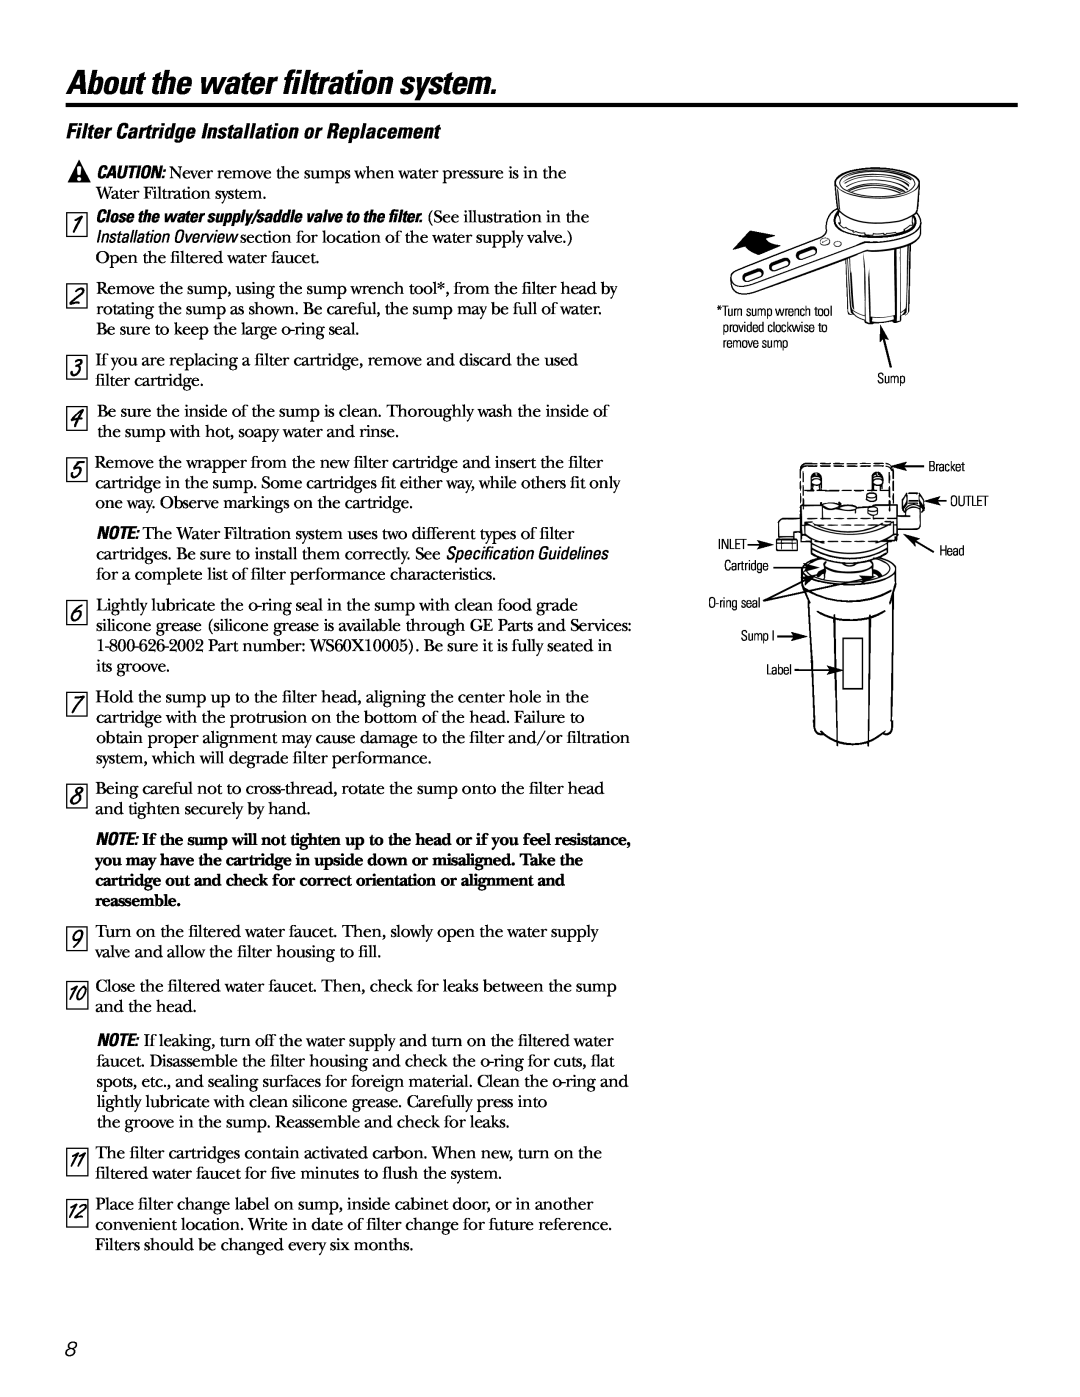 GE 215C1044P010-3 owner manual Filter Cartridge Installation or Replacement, About the water filtration system, reassemble 